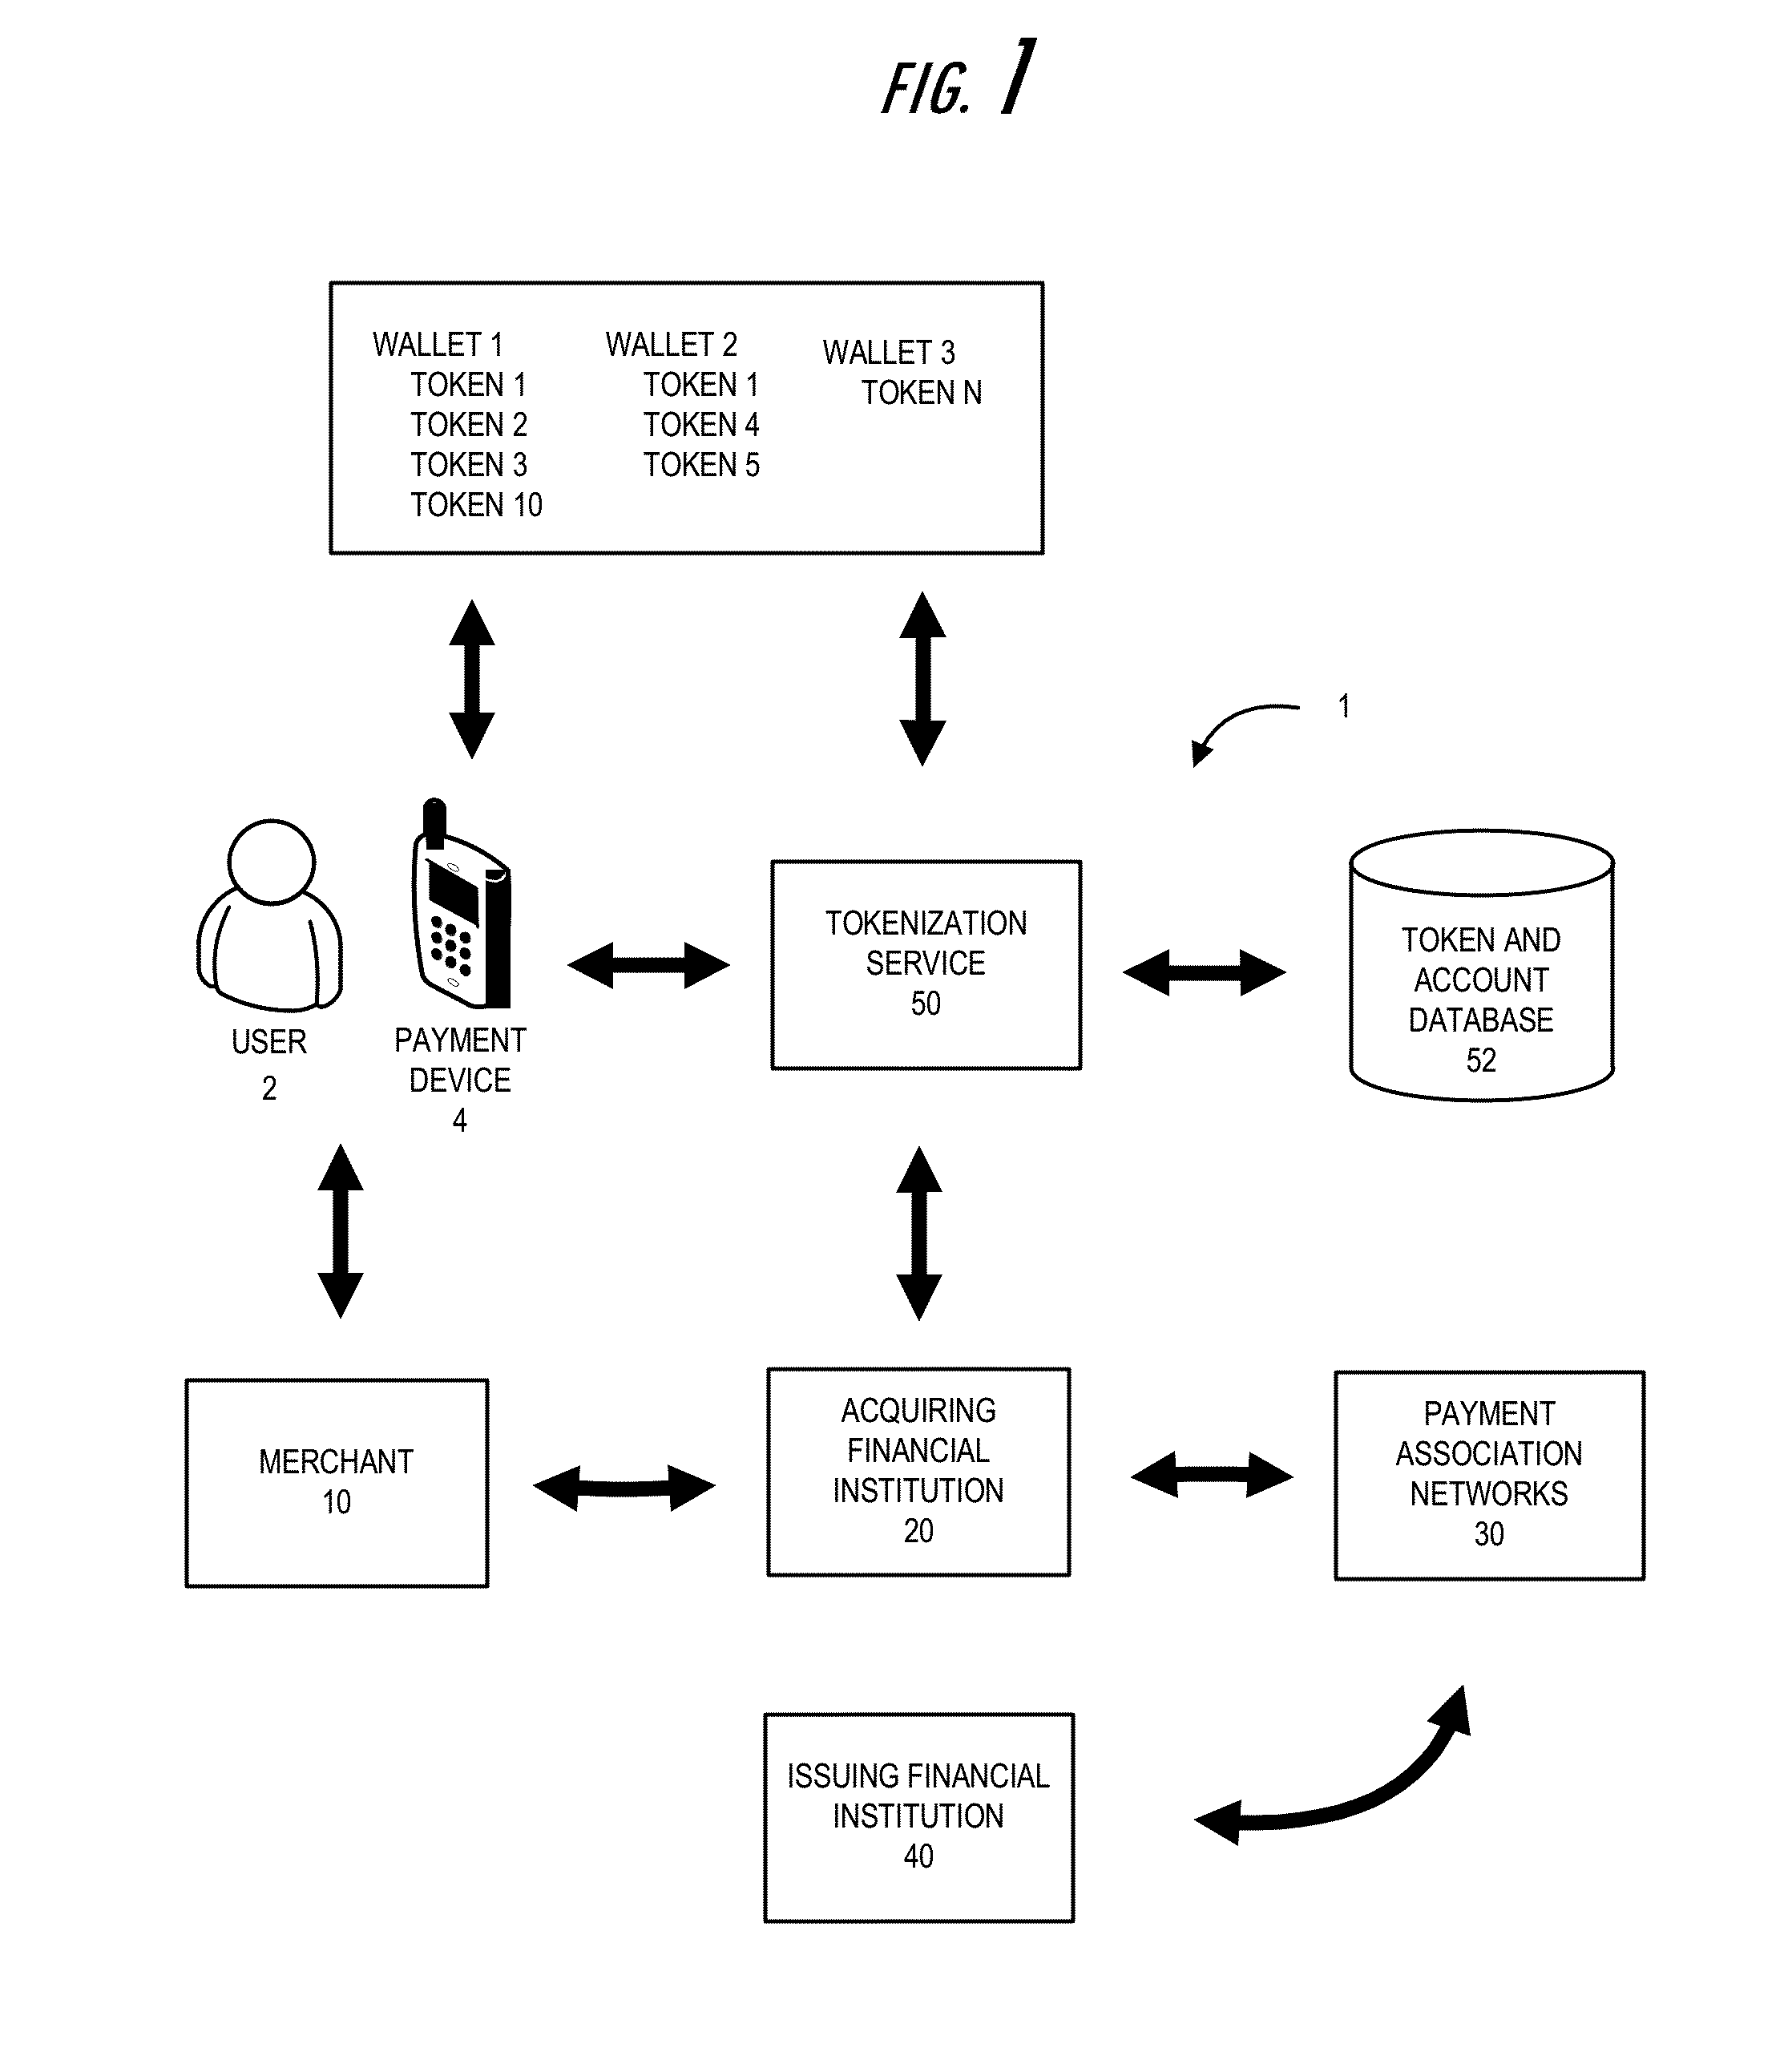 Restoring or reissuing of a token based on user authentication